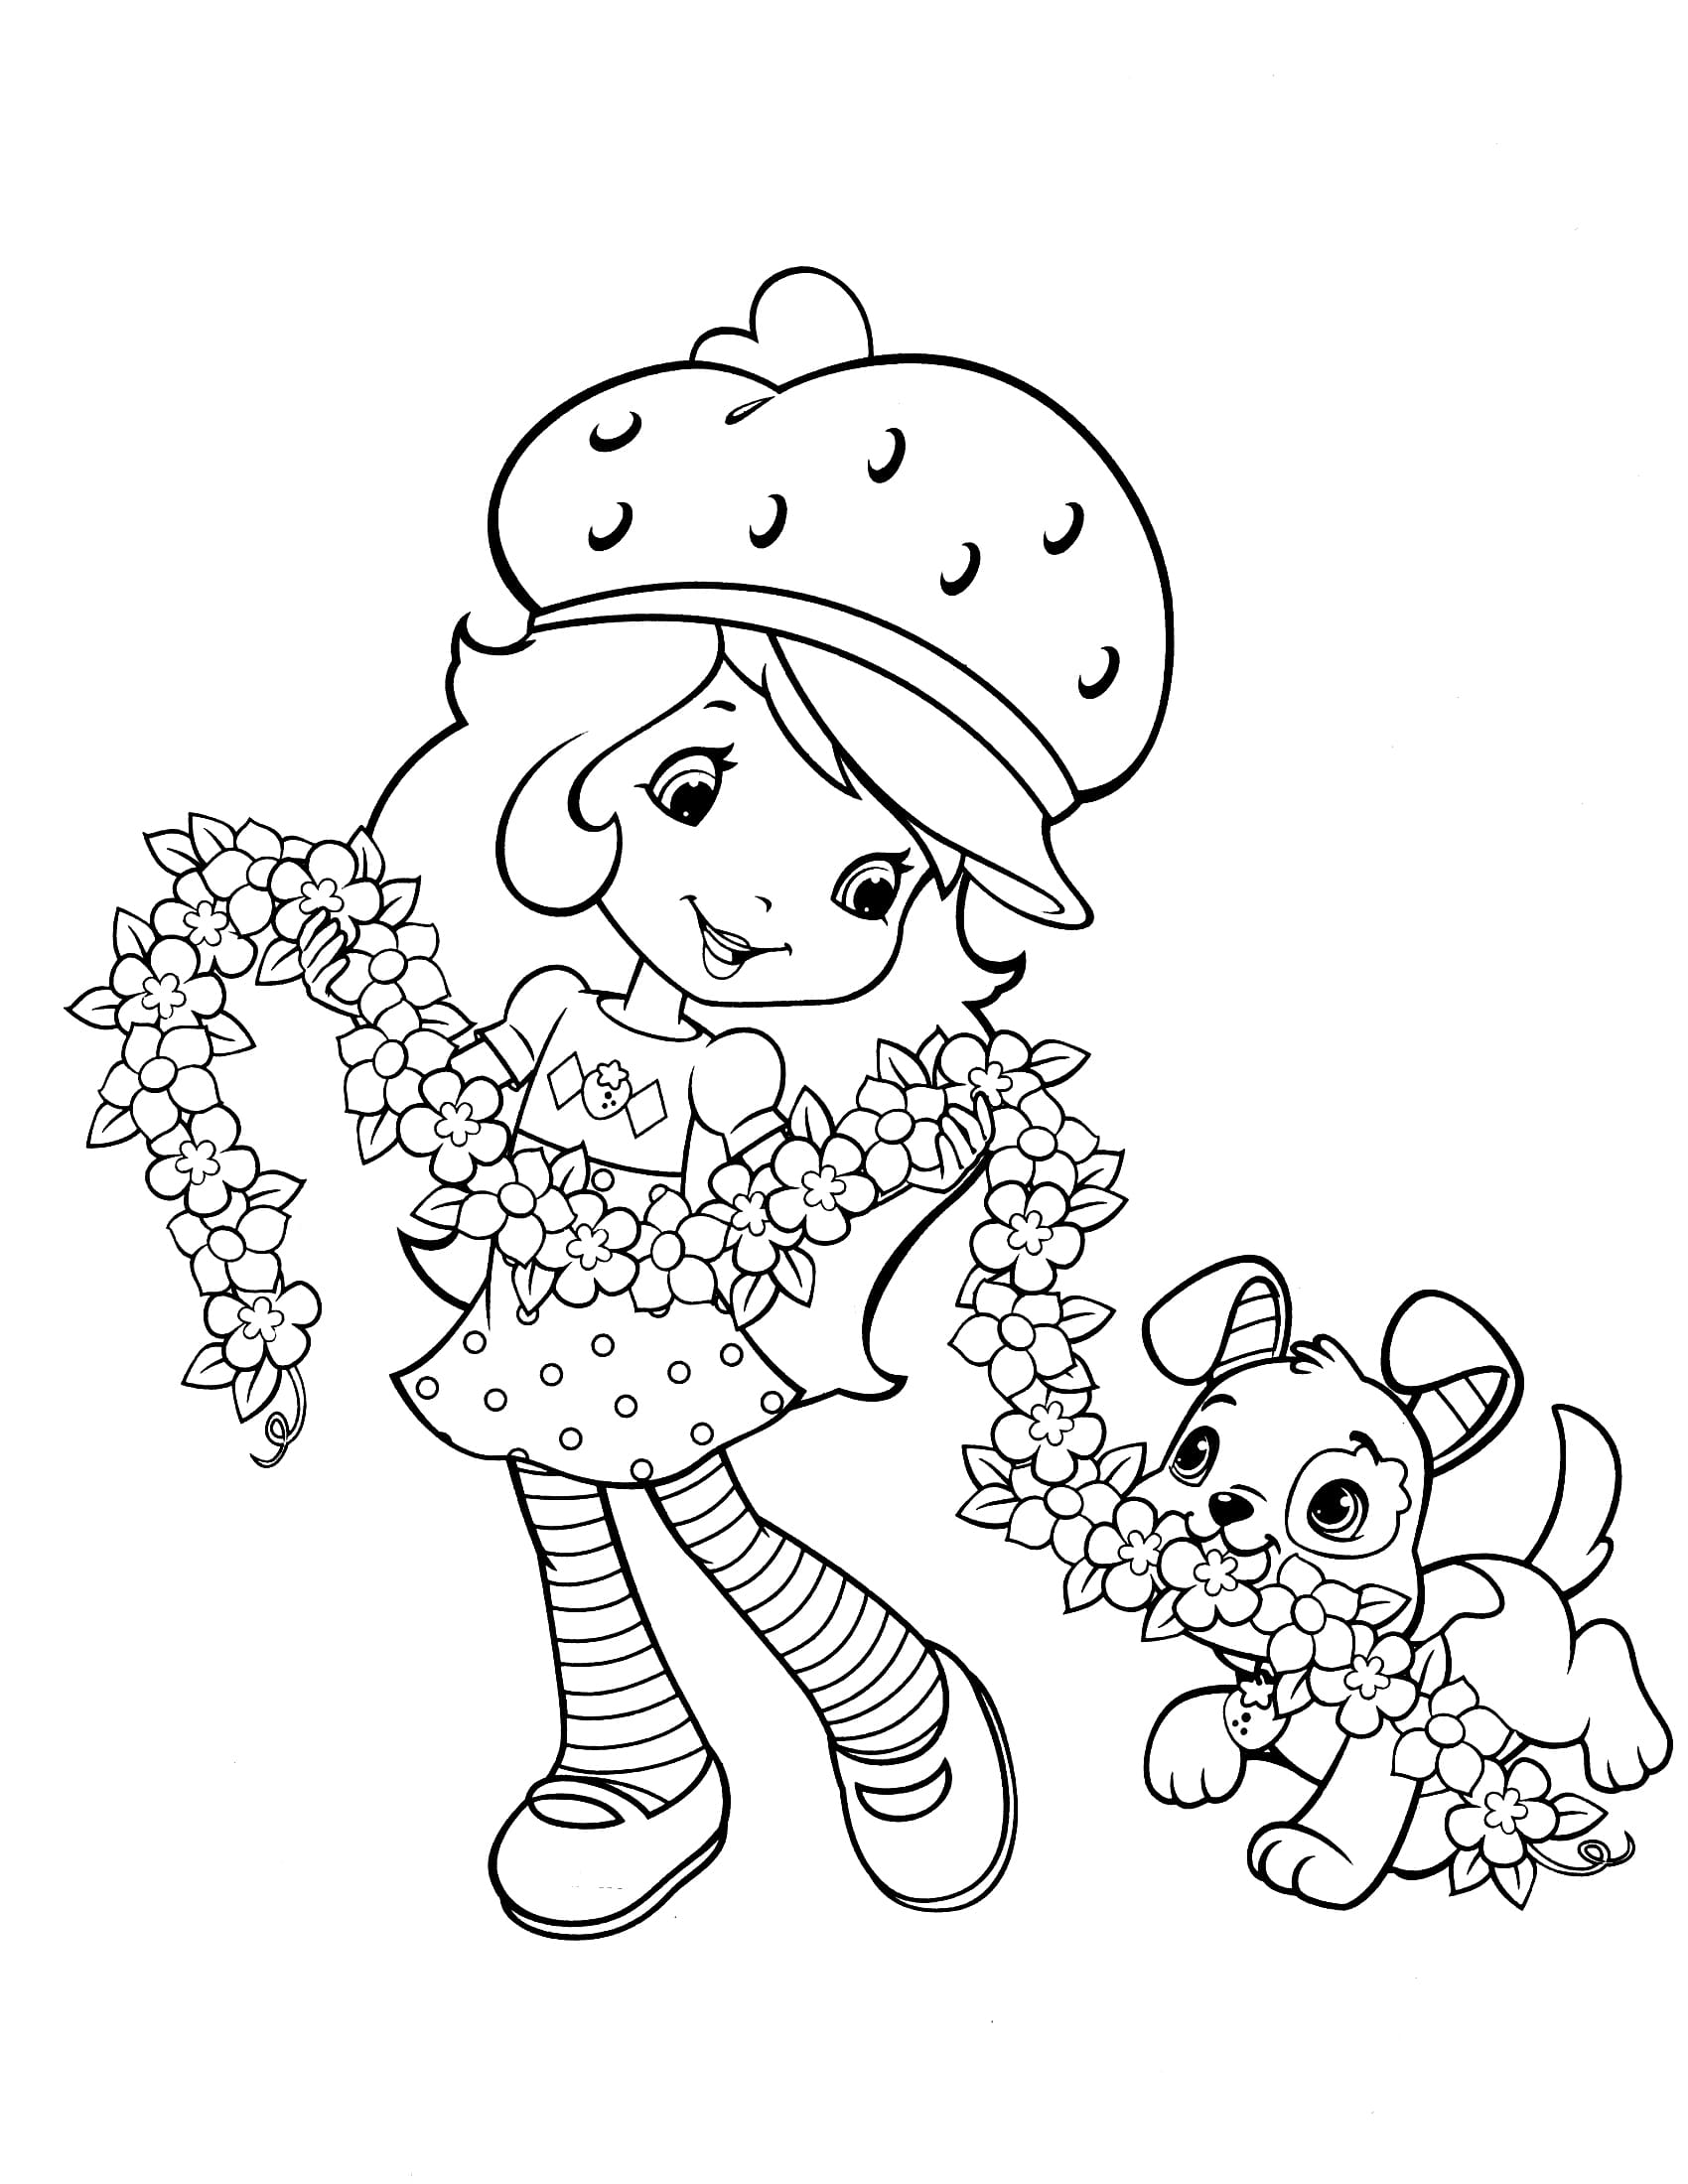 Coloring pages Strawberry Shortcake Free printable